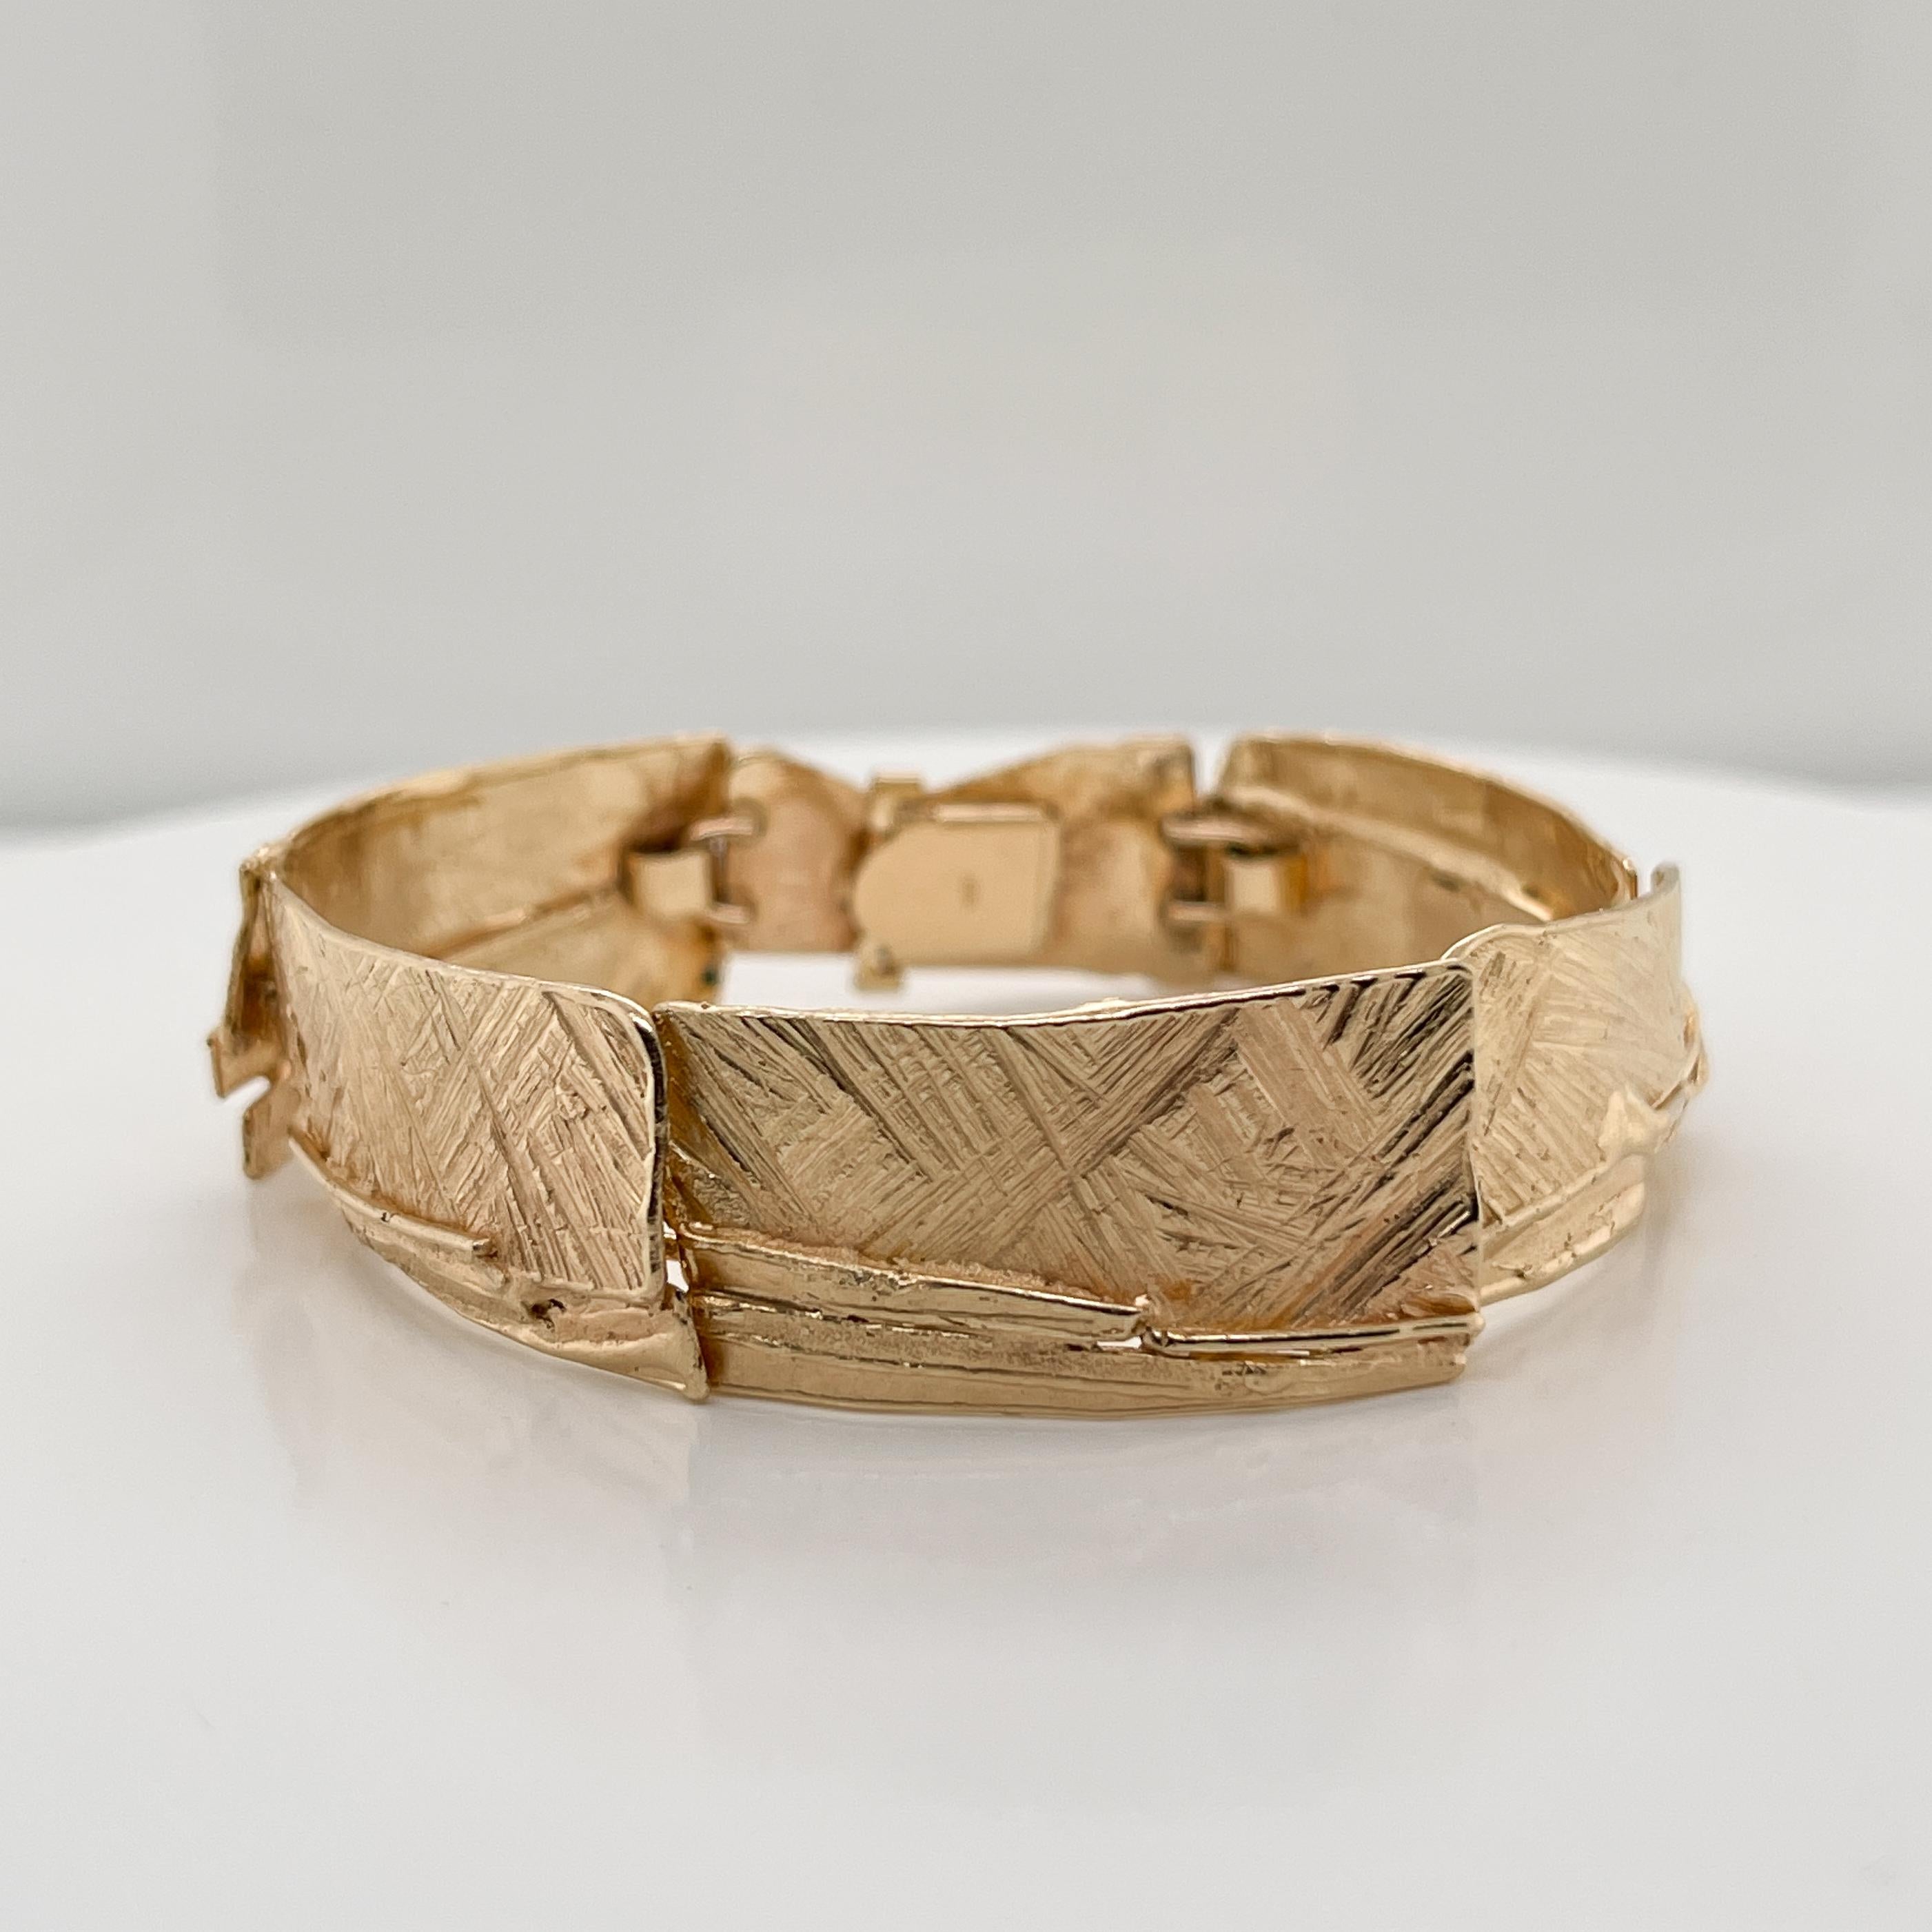 A fine Modernist gold bracelet. 

With 7 cast, leaf-like links in 14k yellow gold.

Attributed to Glenda Arentzen. 

Together with its Aaron Faber presentation box and leather pouch.

Simply great design from one of American's leading, cutting-edge